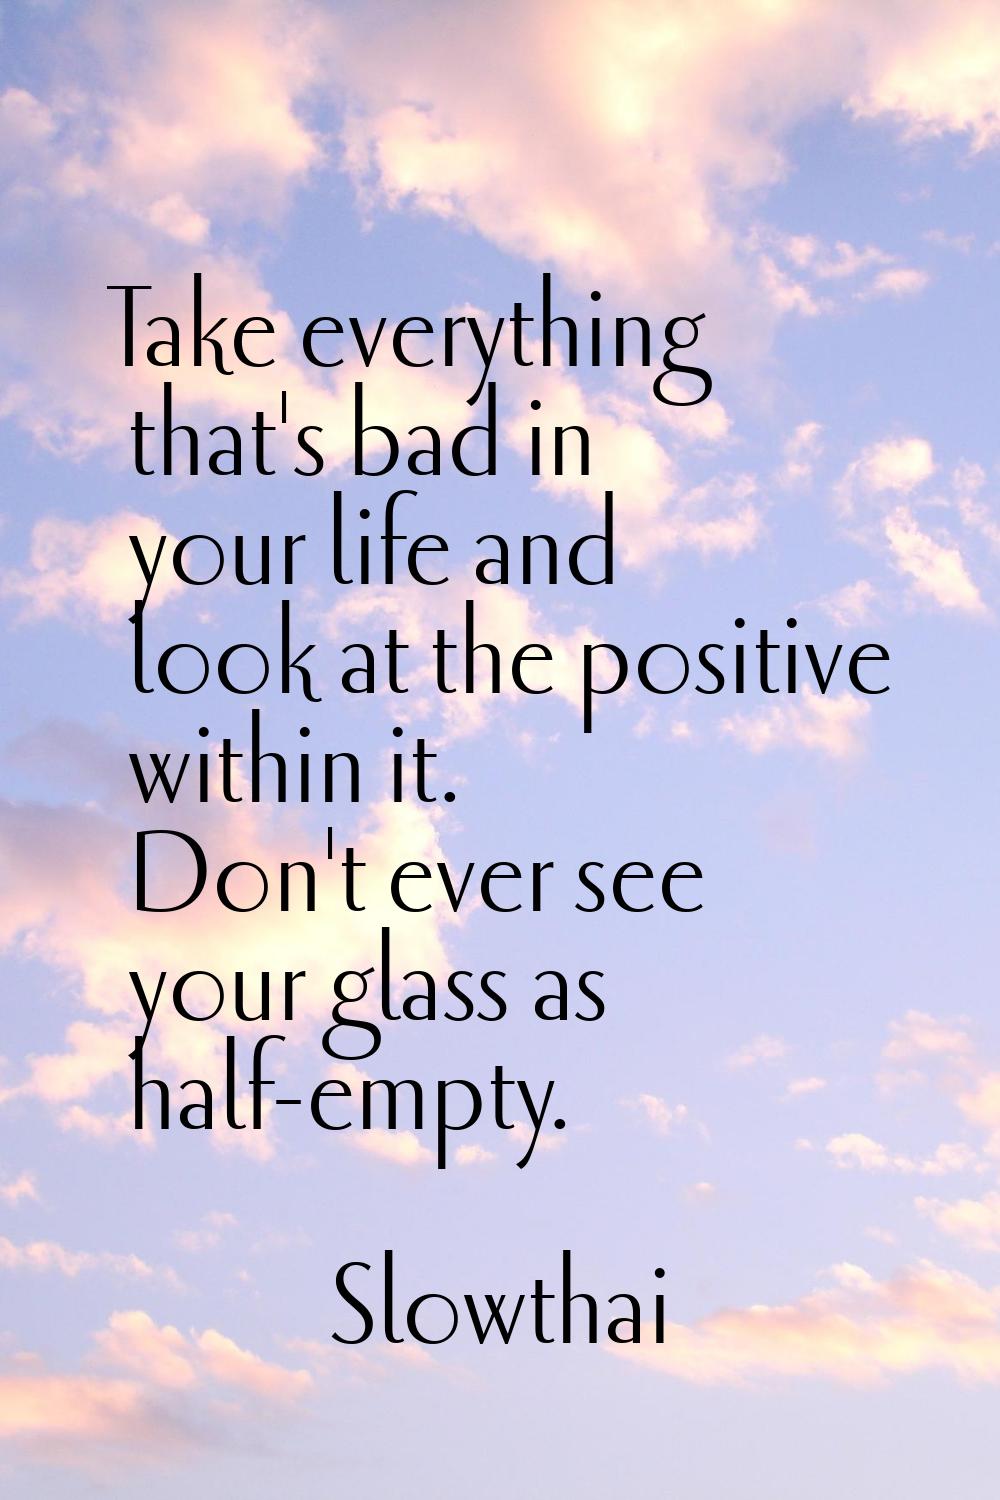 Take everything that's bad in your life and look at the positive within it. Don't ever see your gla